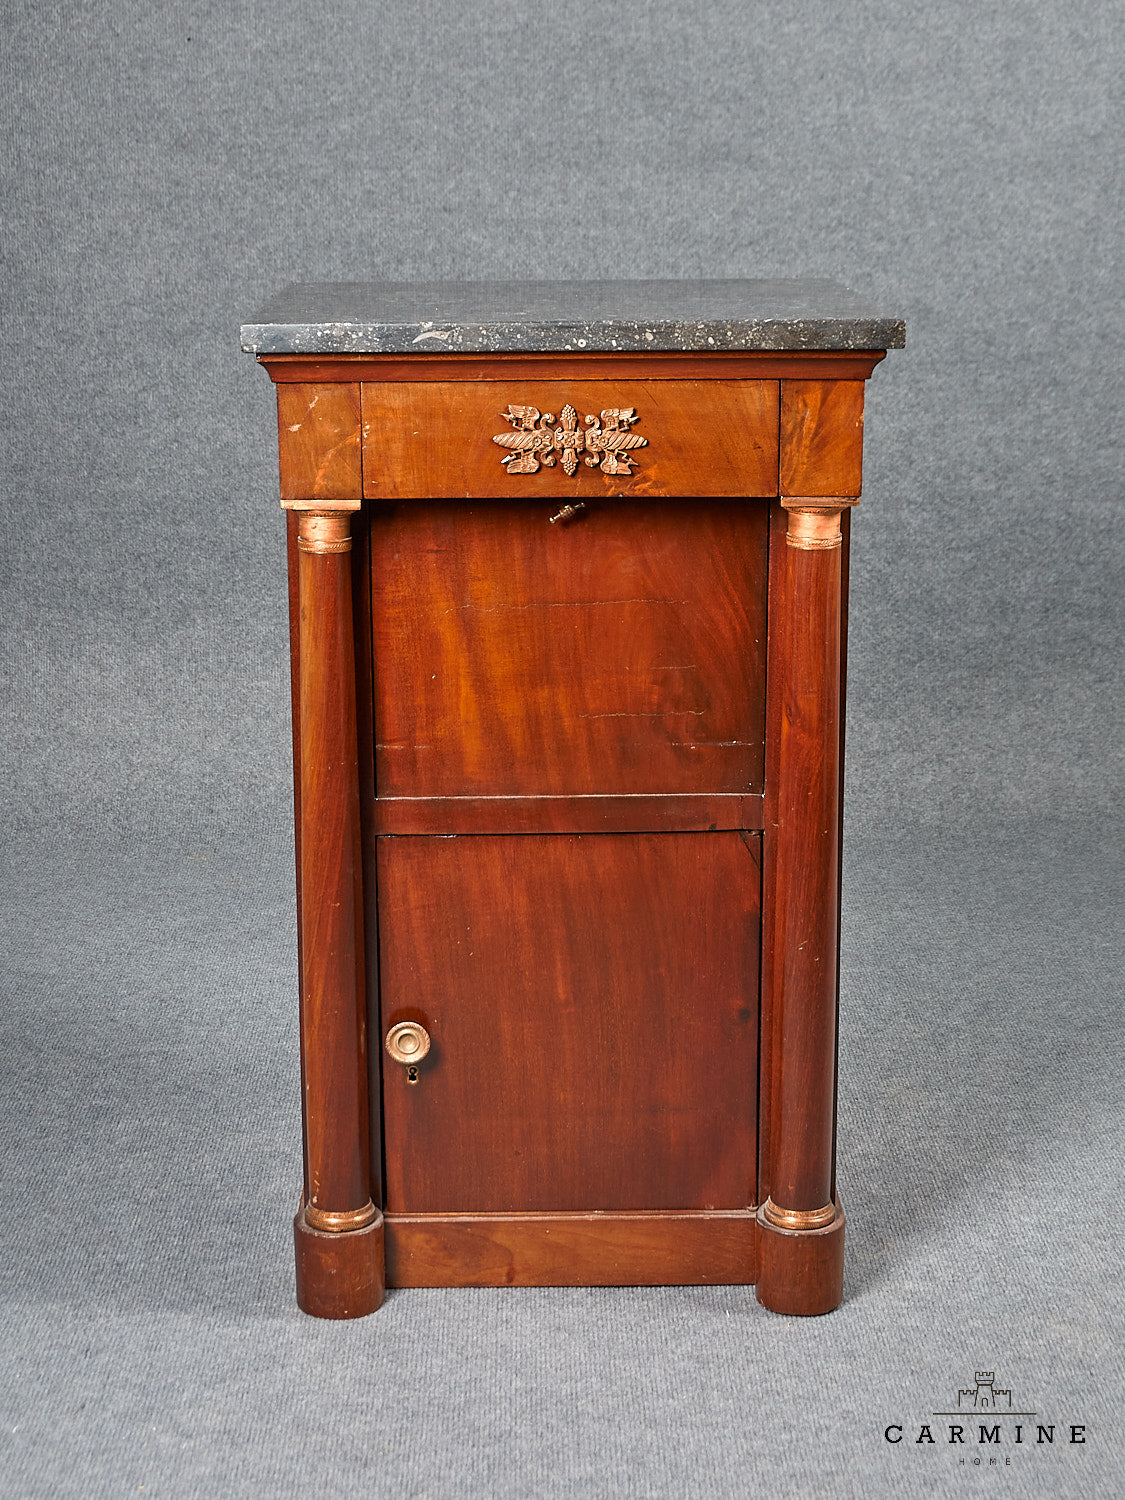 Empire side table around 1800